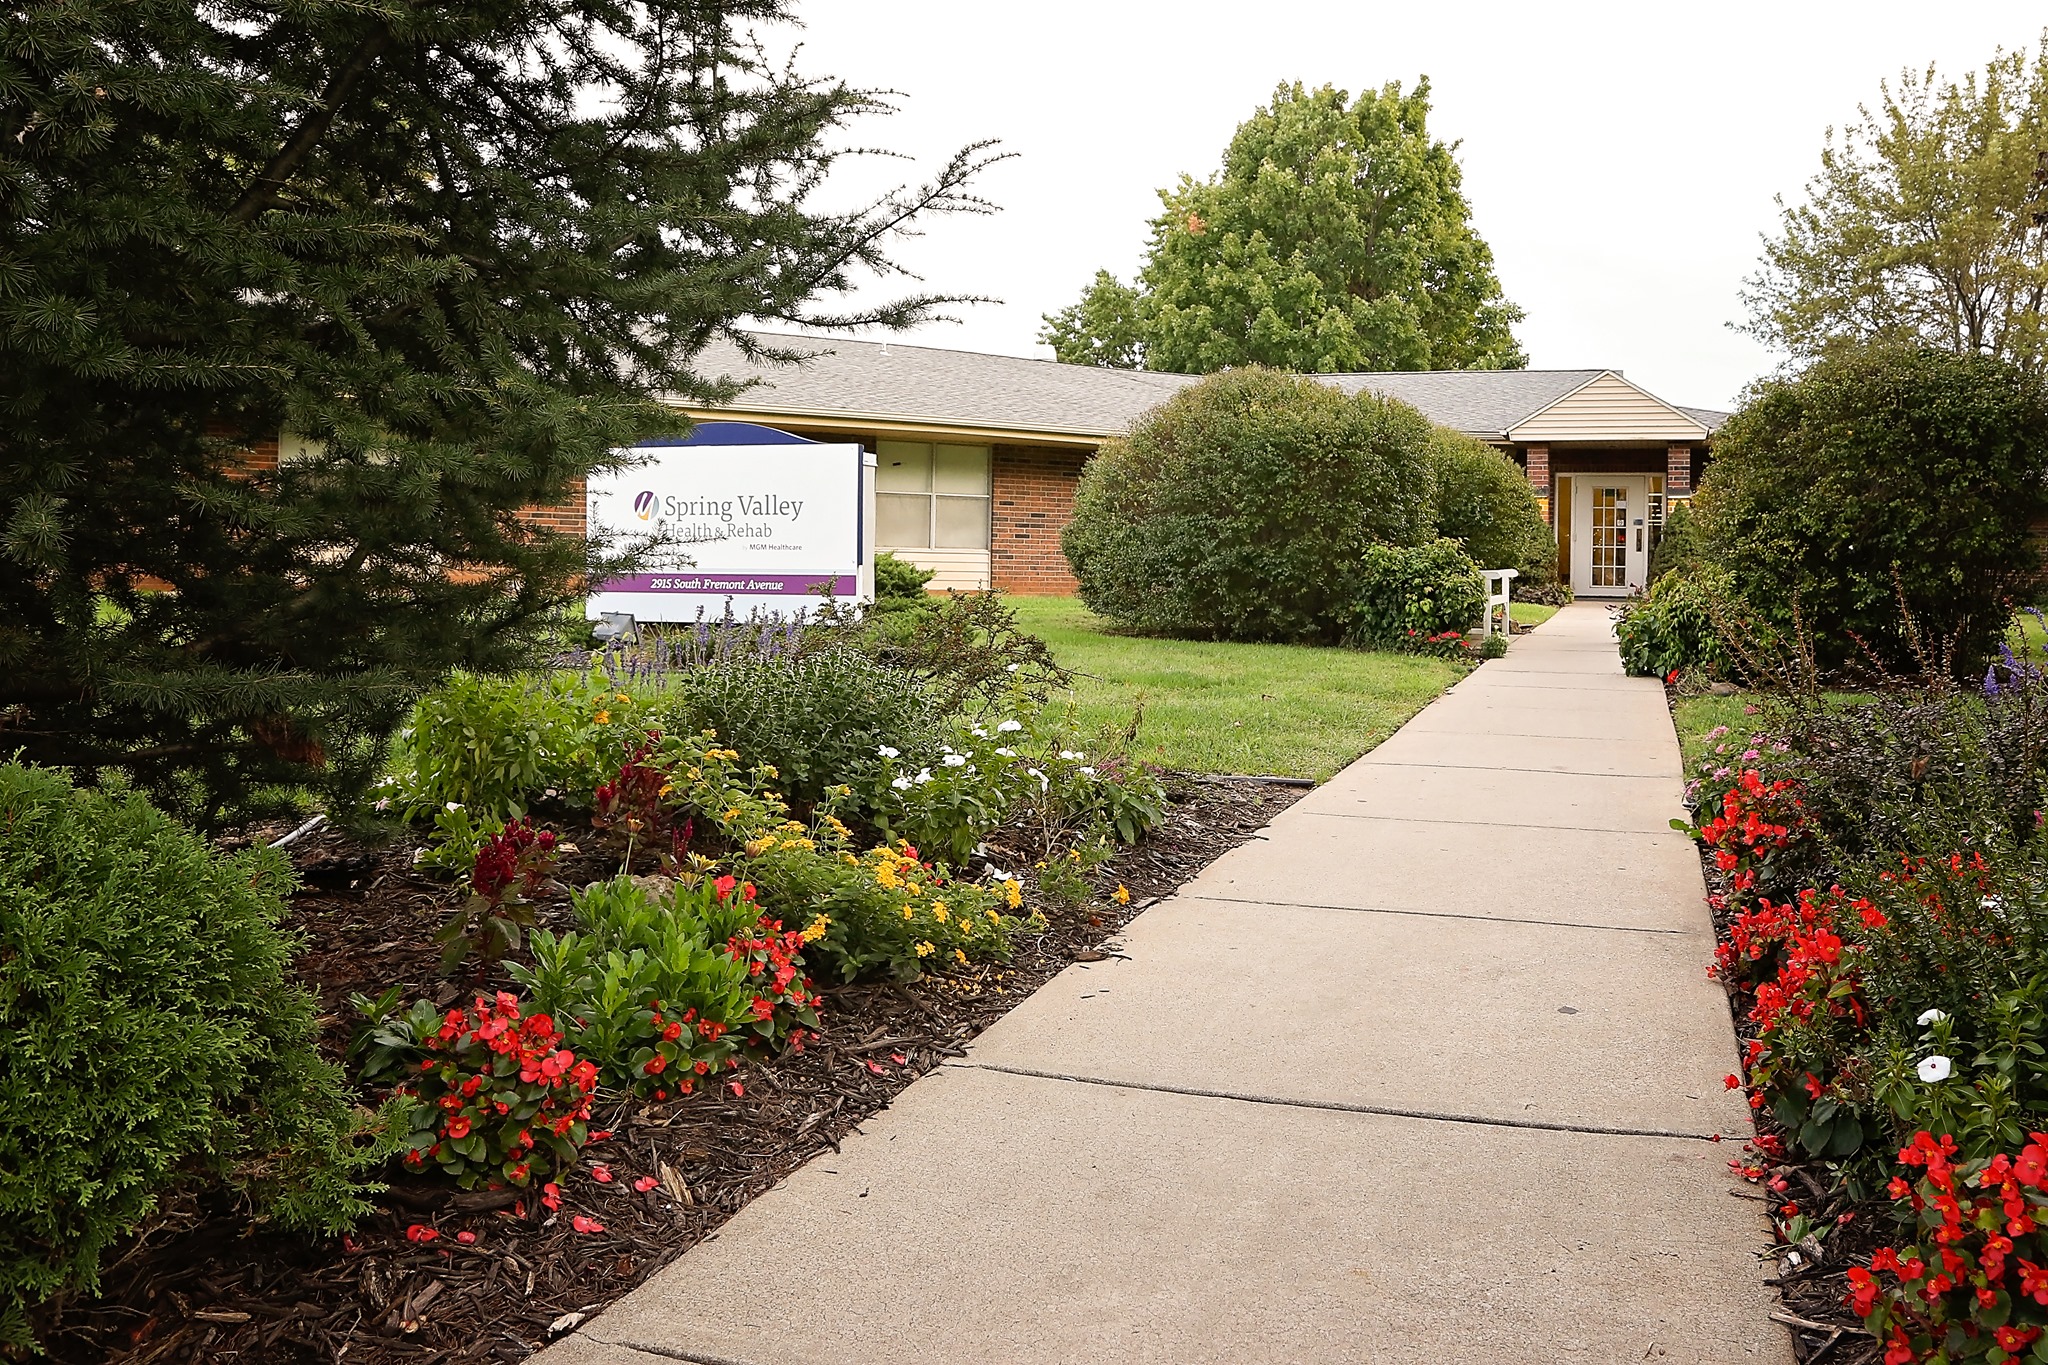 spring-valley-assisted-living-facility-image-1